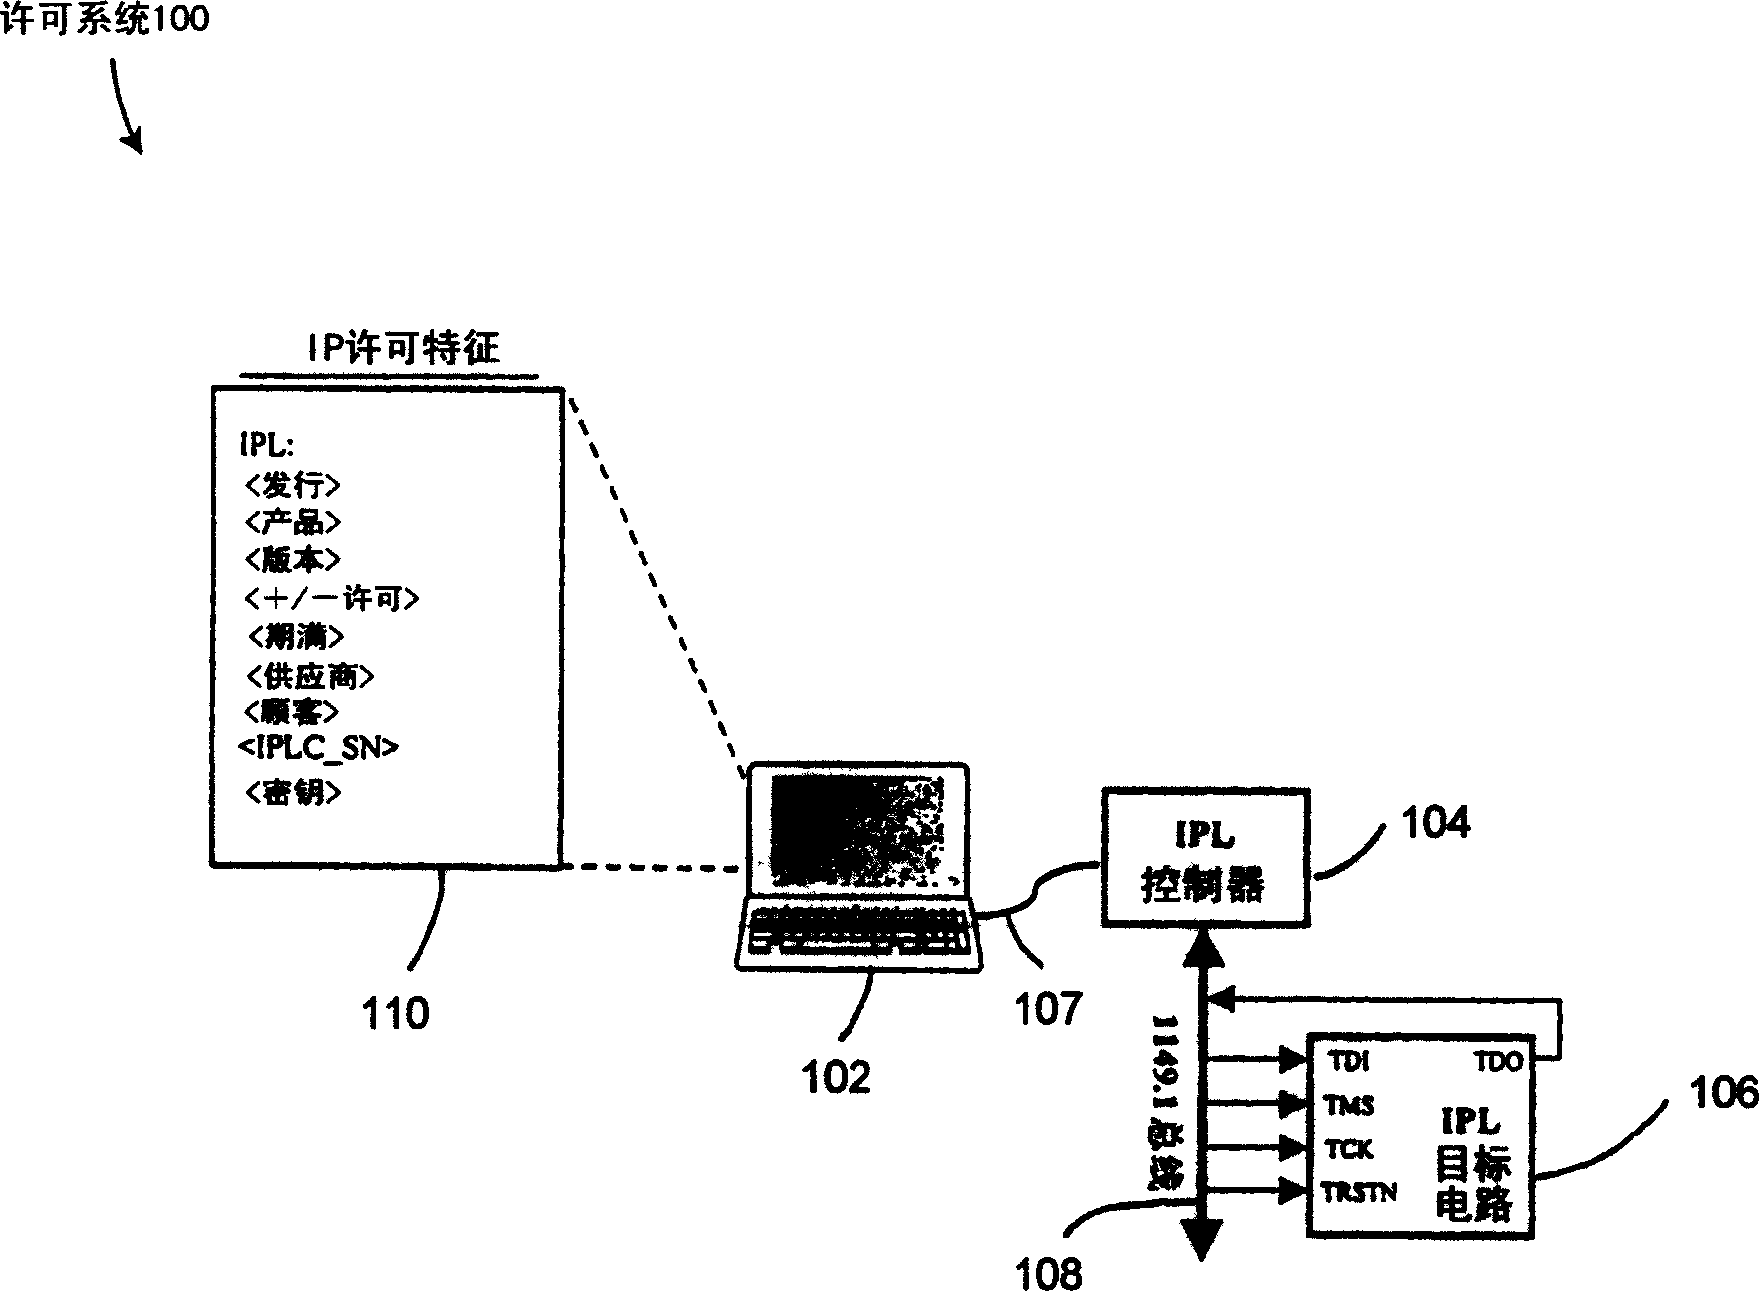 Management system, method and apparatus for licensed delivery and accounting of electronic circuits